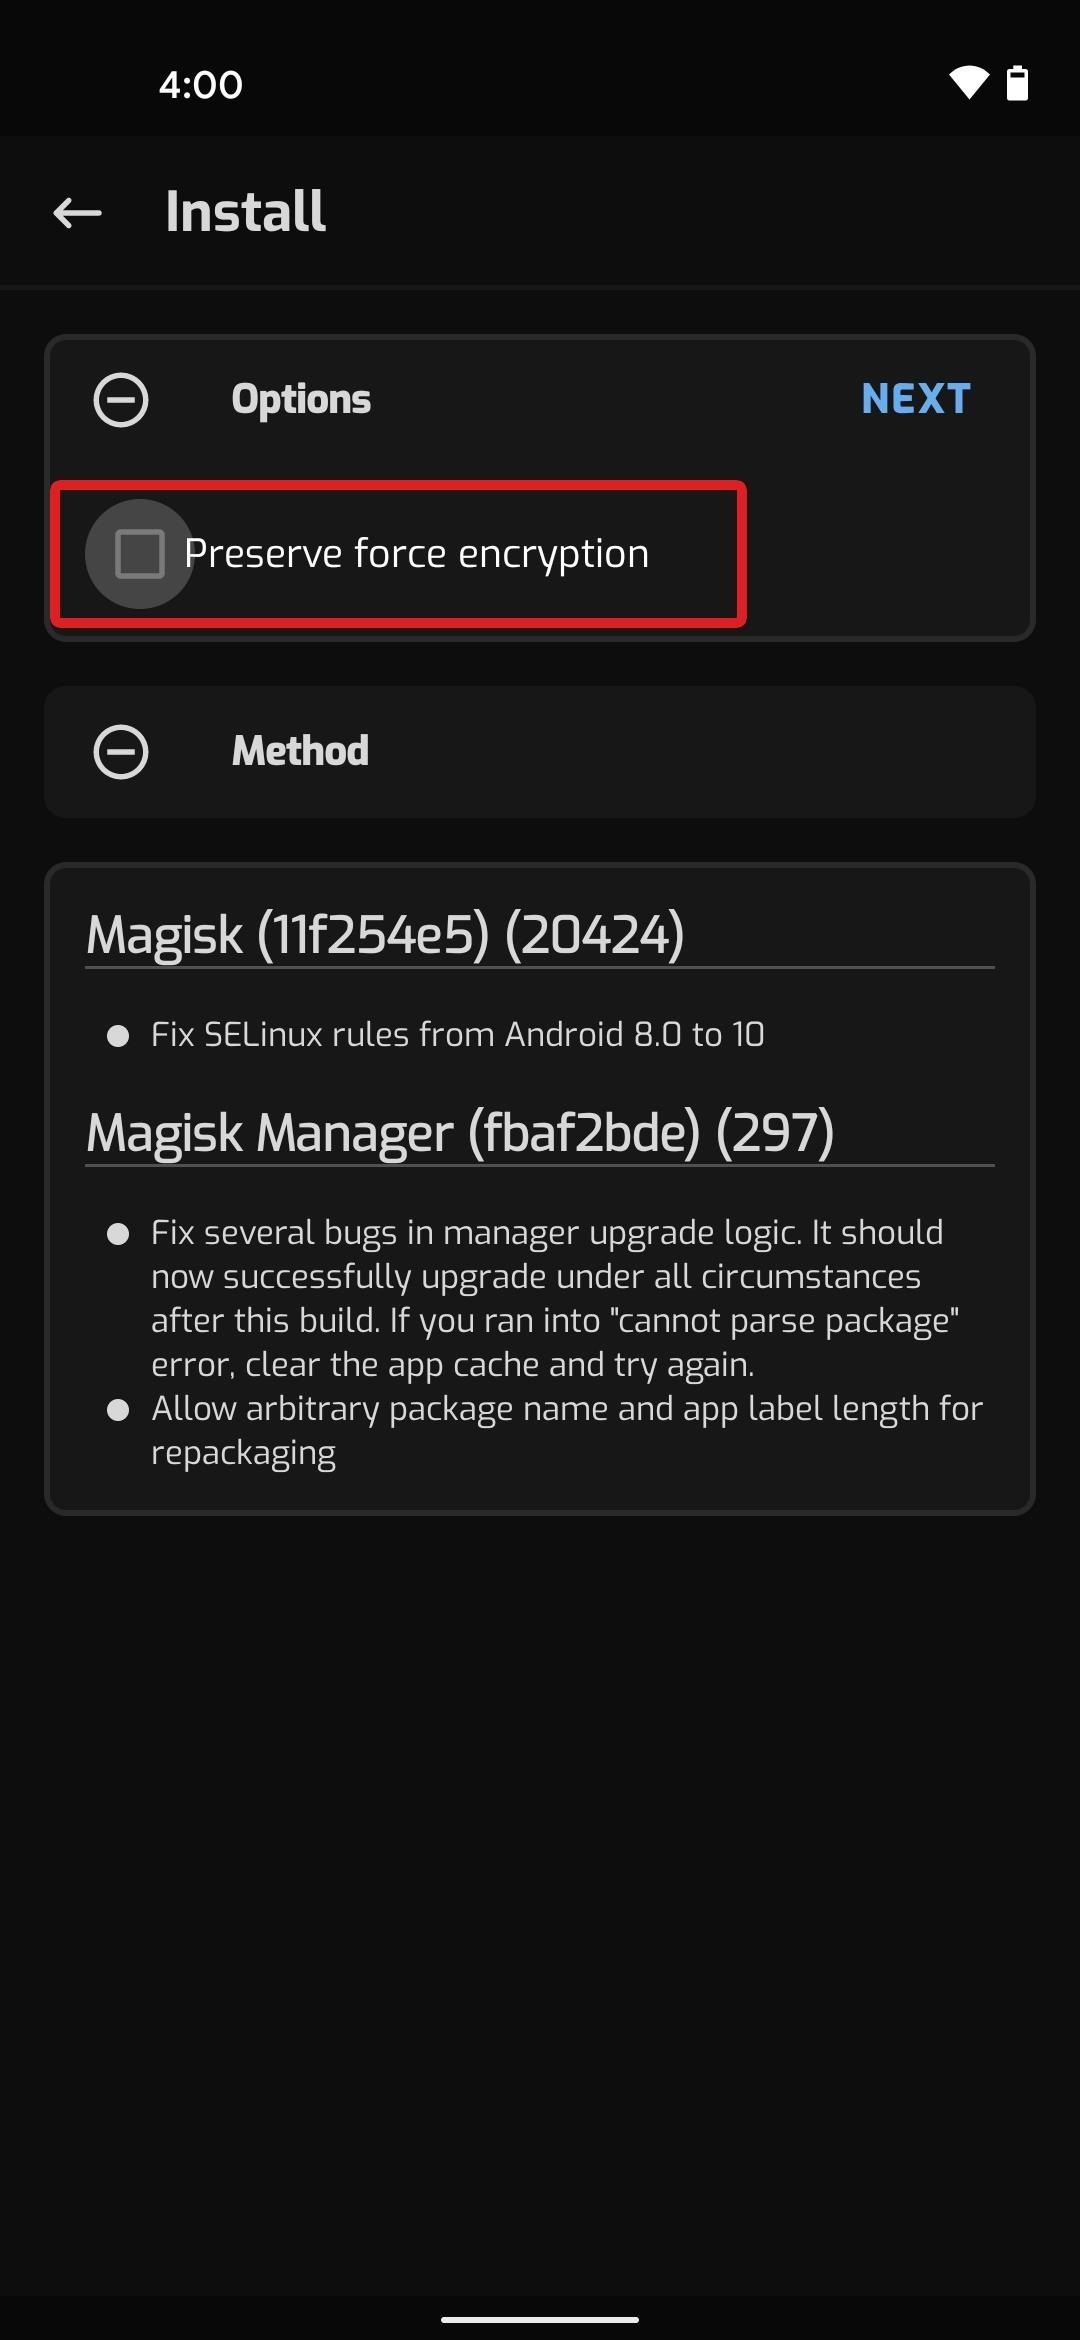 How to Root Android 11 on the Pixel 4a — Every Step Covered in Detail